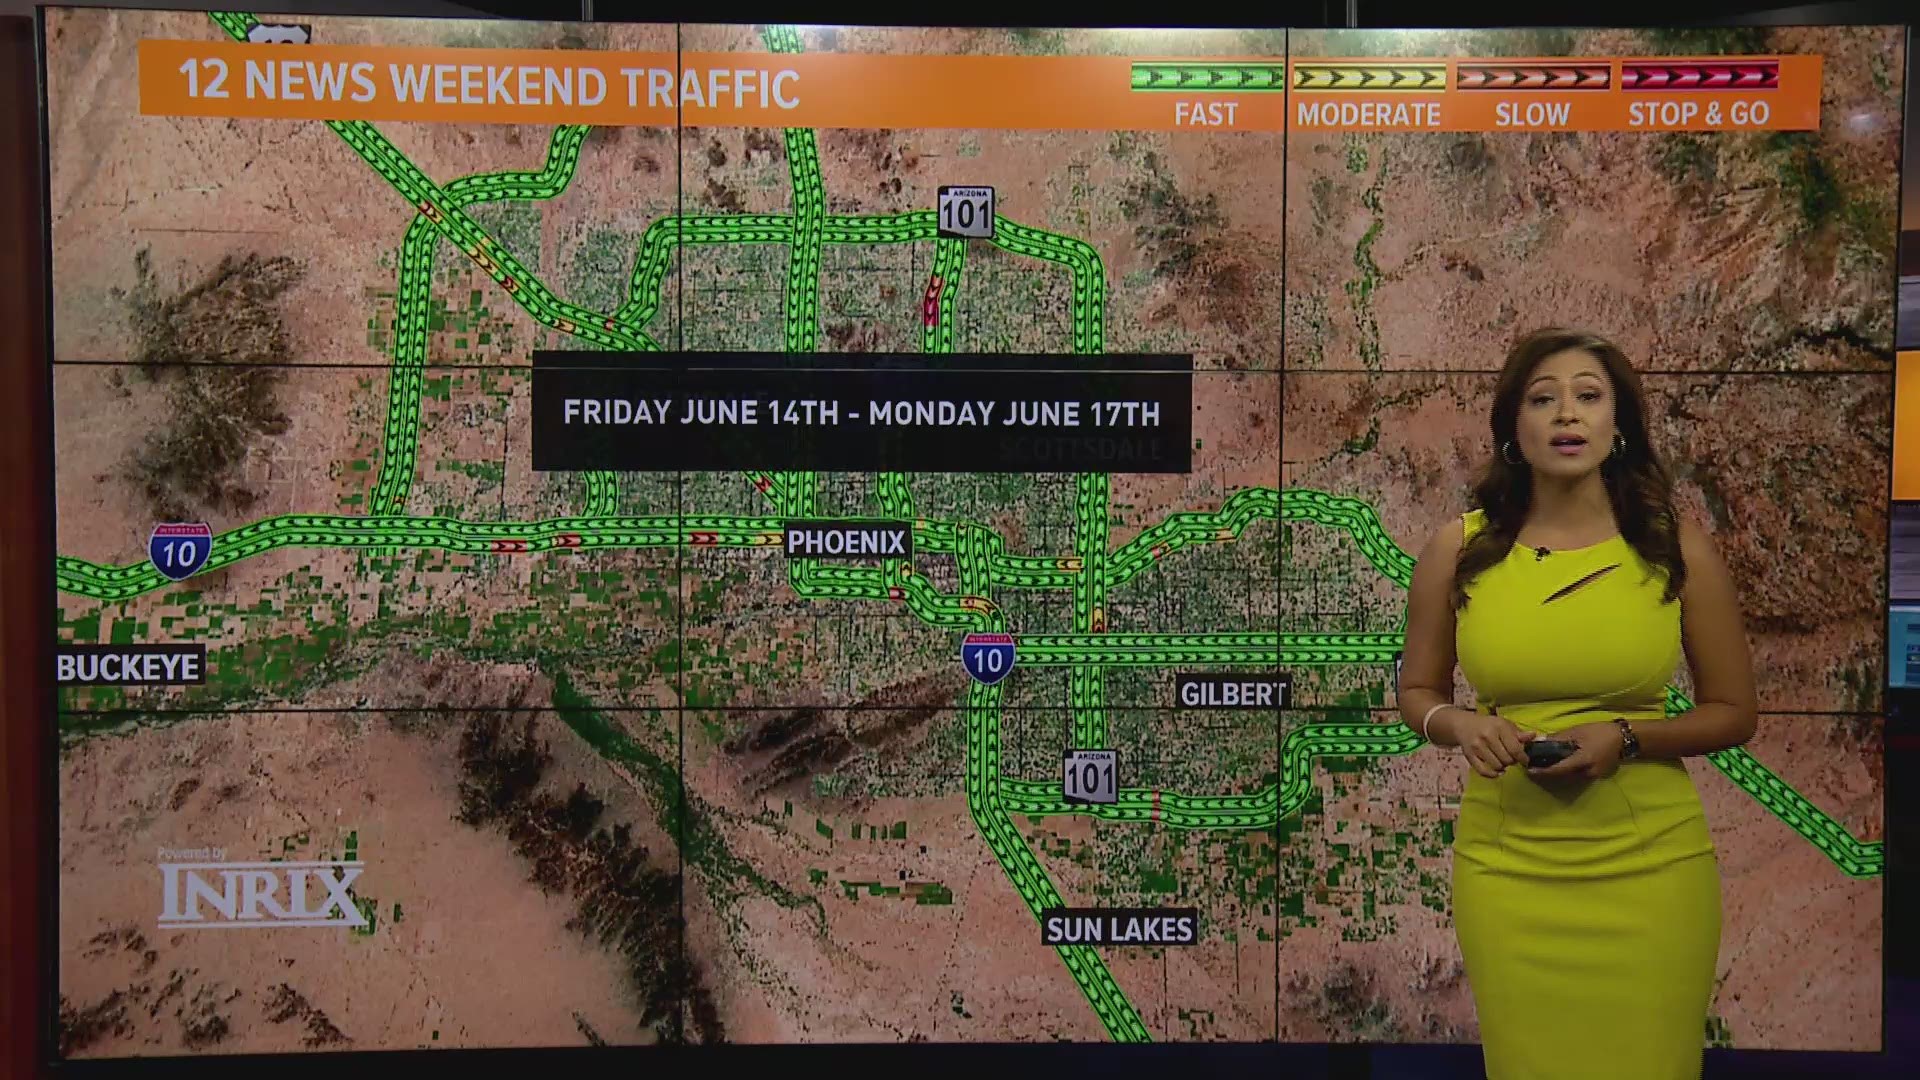 Vanessa Ramirez gives us the details on this weekend's traffic closures and restrictions in the Valley.